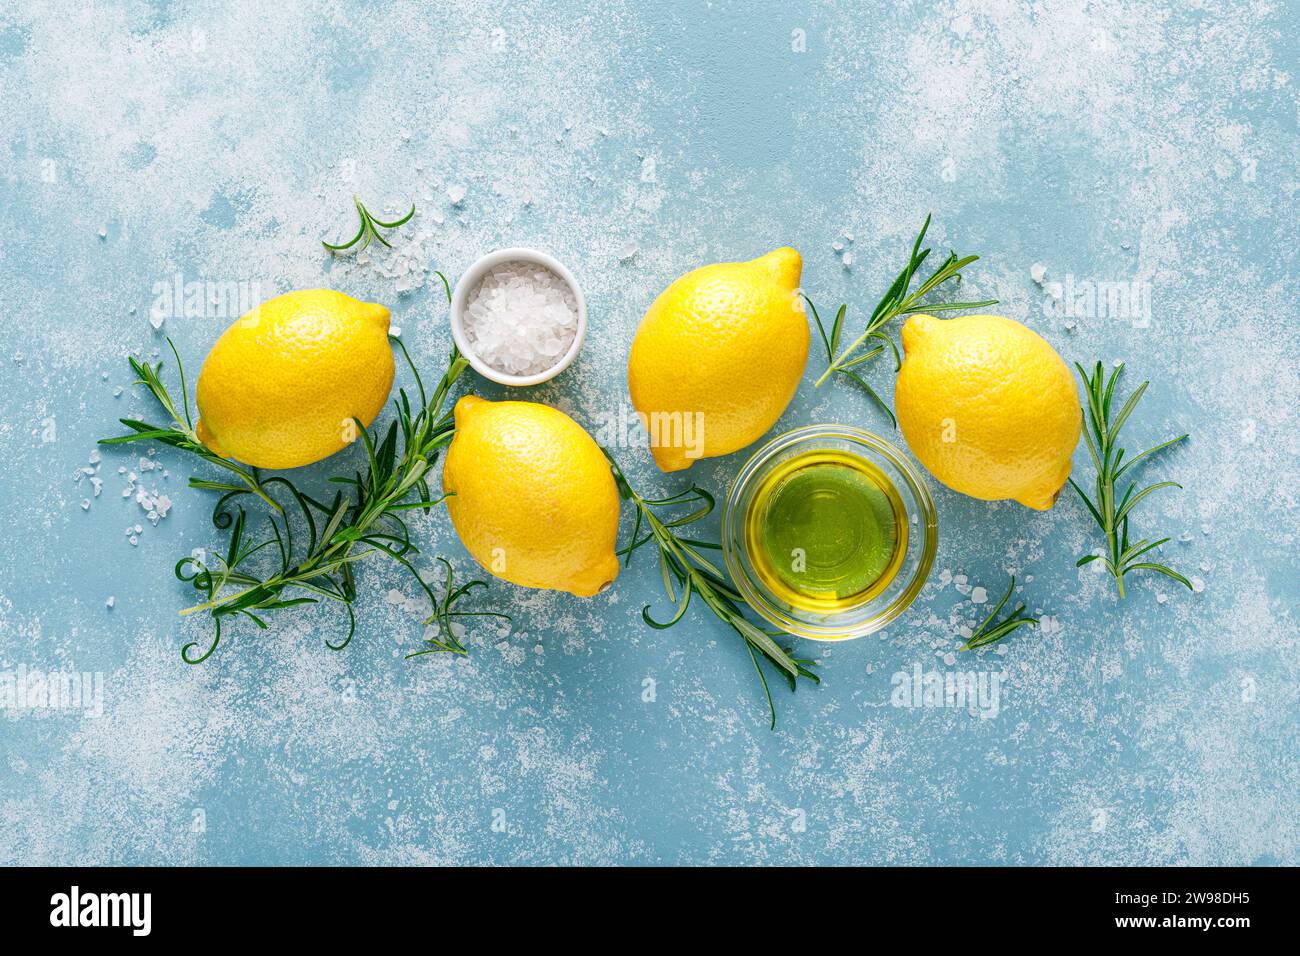 Lemon, rosemary, garlic, salt and olive oil. Ingredients for mediterranean cuisine cooking. Top view Stock Photo